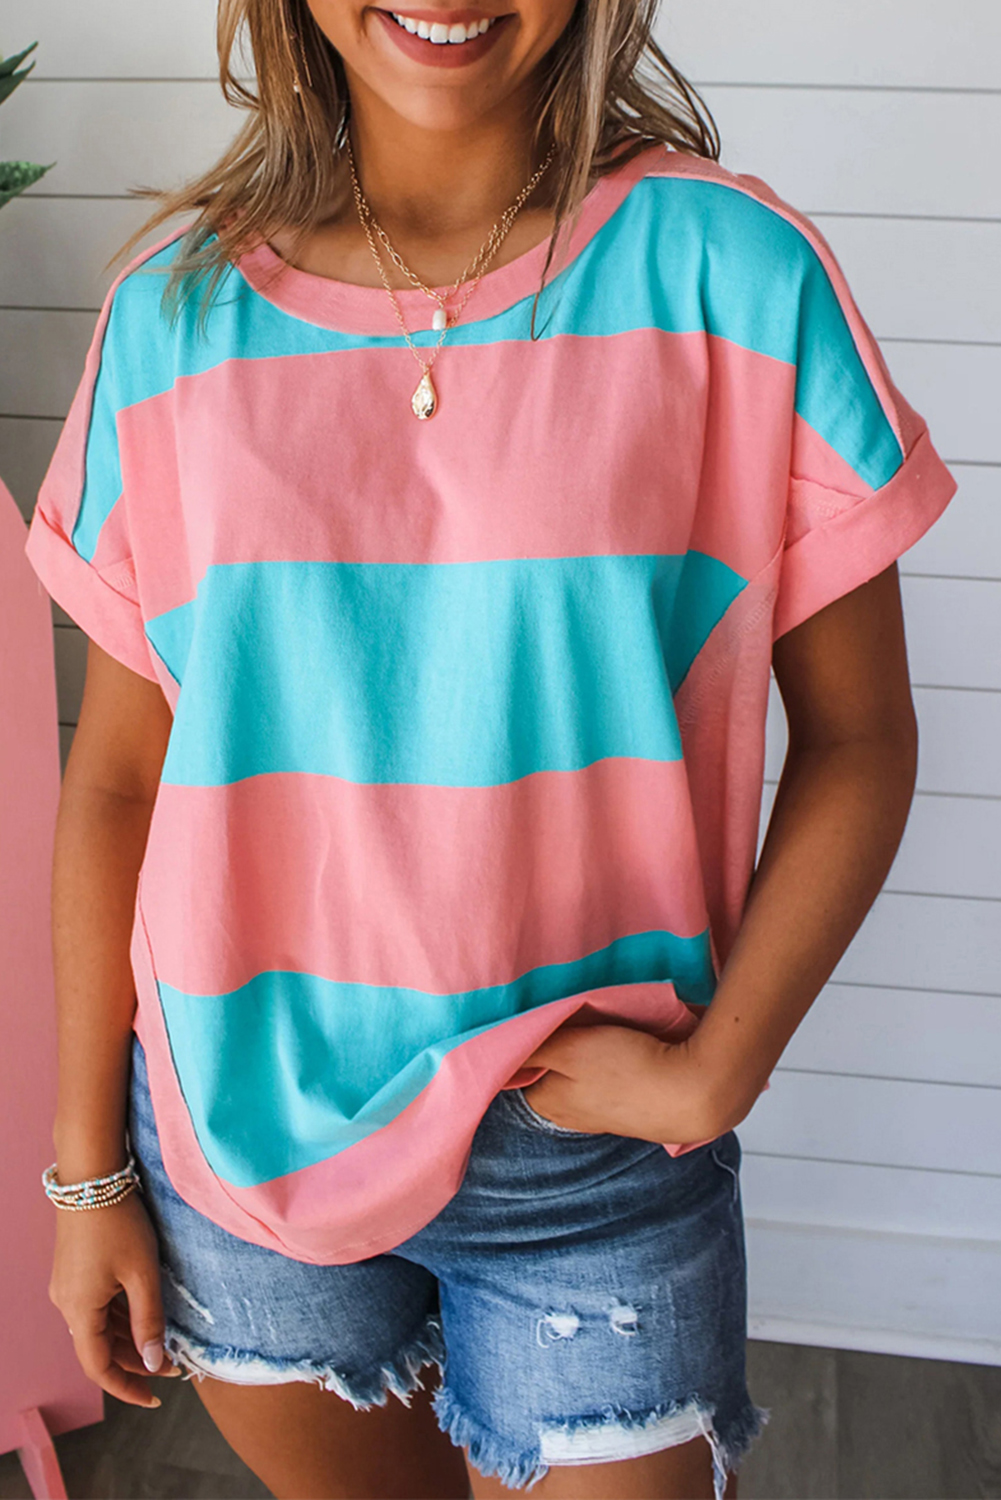 Shewin Wholesale Dropshippers Rose & Blue Colorblock Exposed Seam Tee